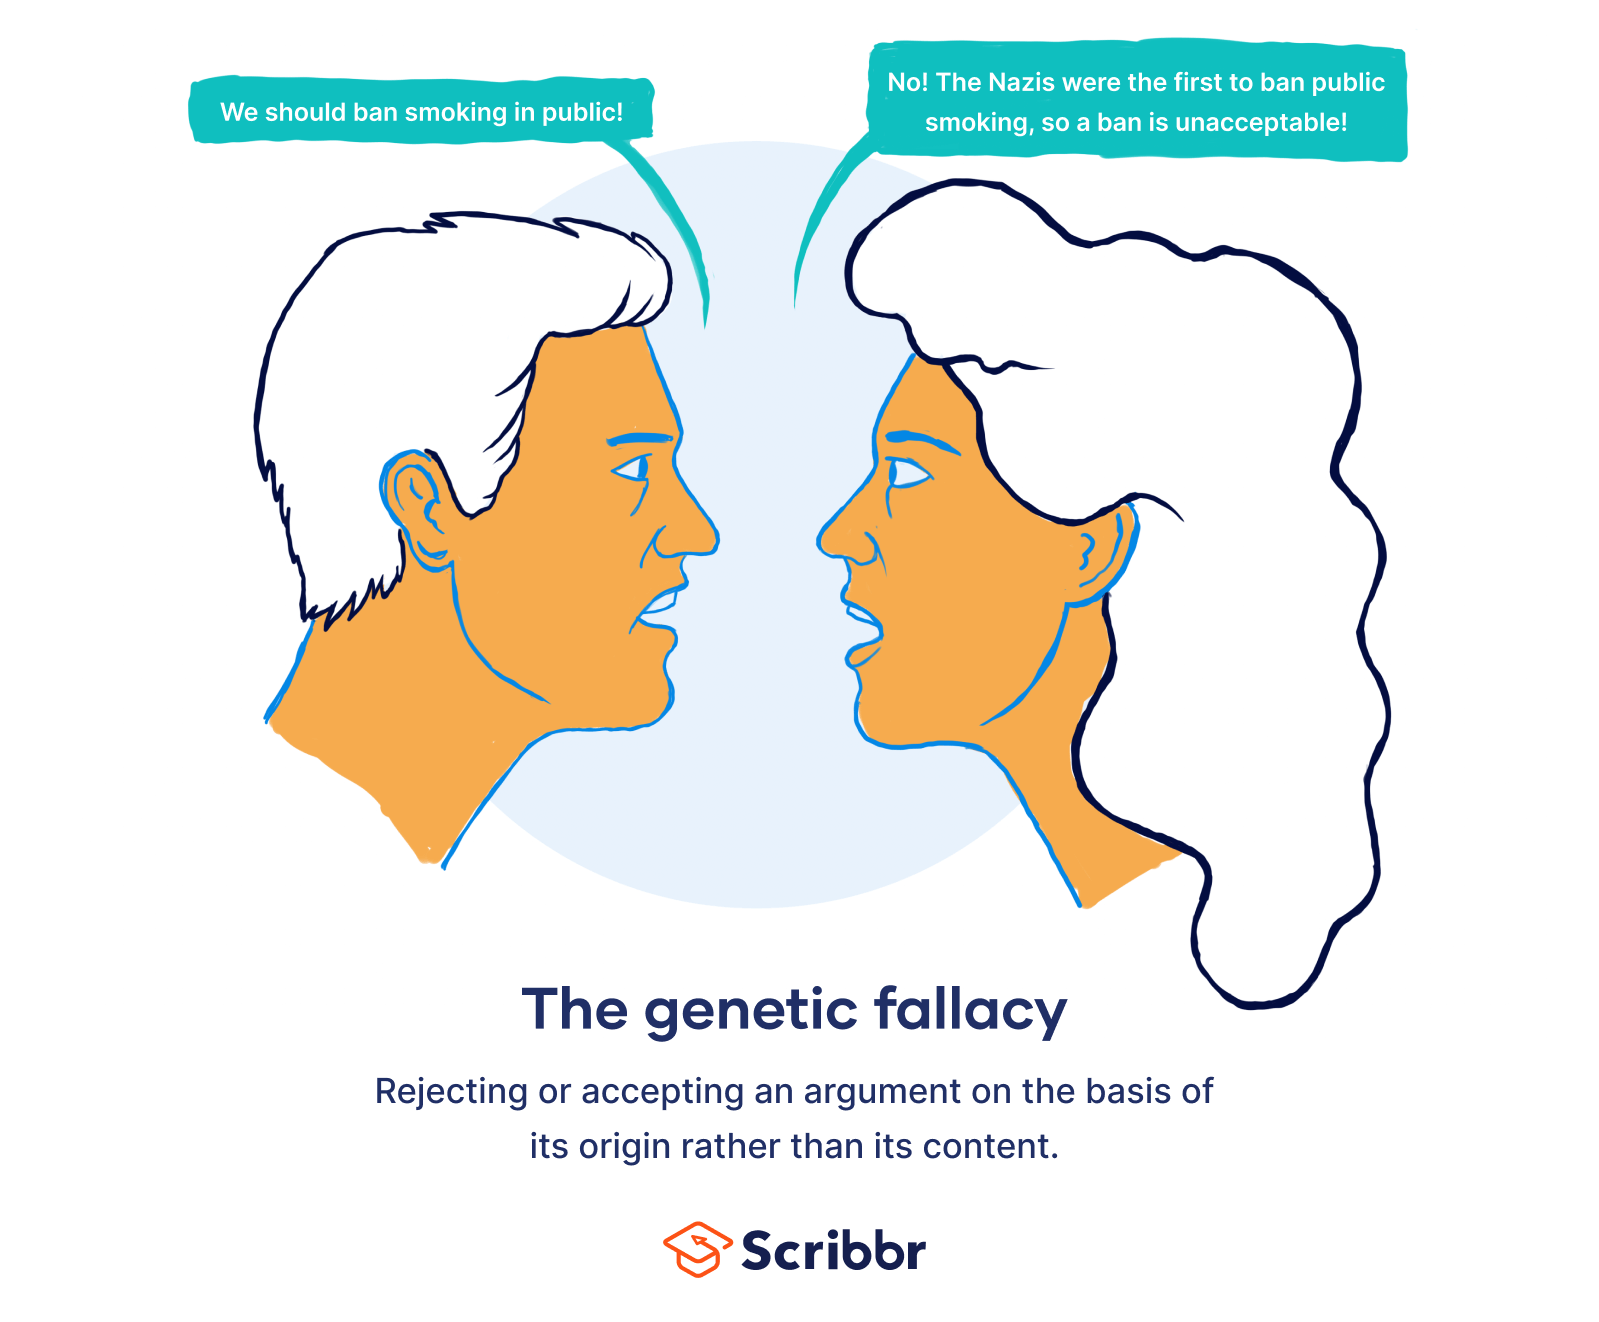 What is the genetic fallacy?